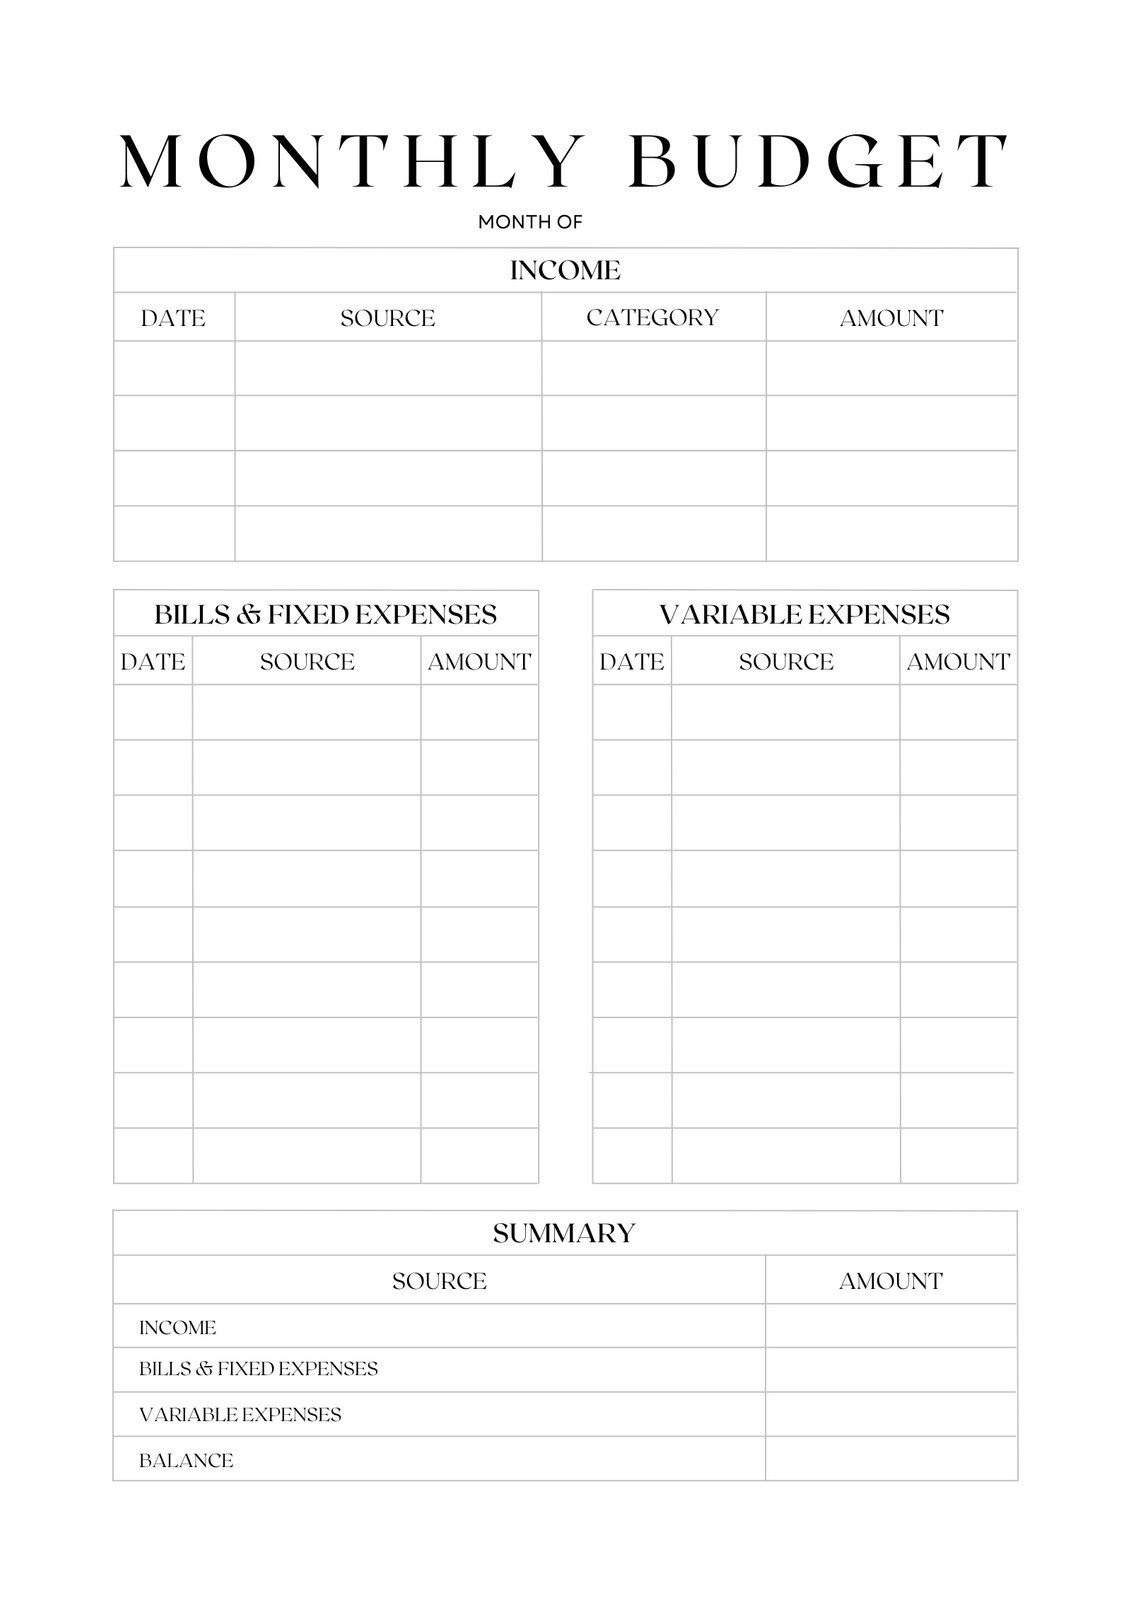 Organization Kit: Budget Section. / Pdf to download and print (unlimited) /  Budget management / Planner /